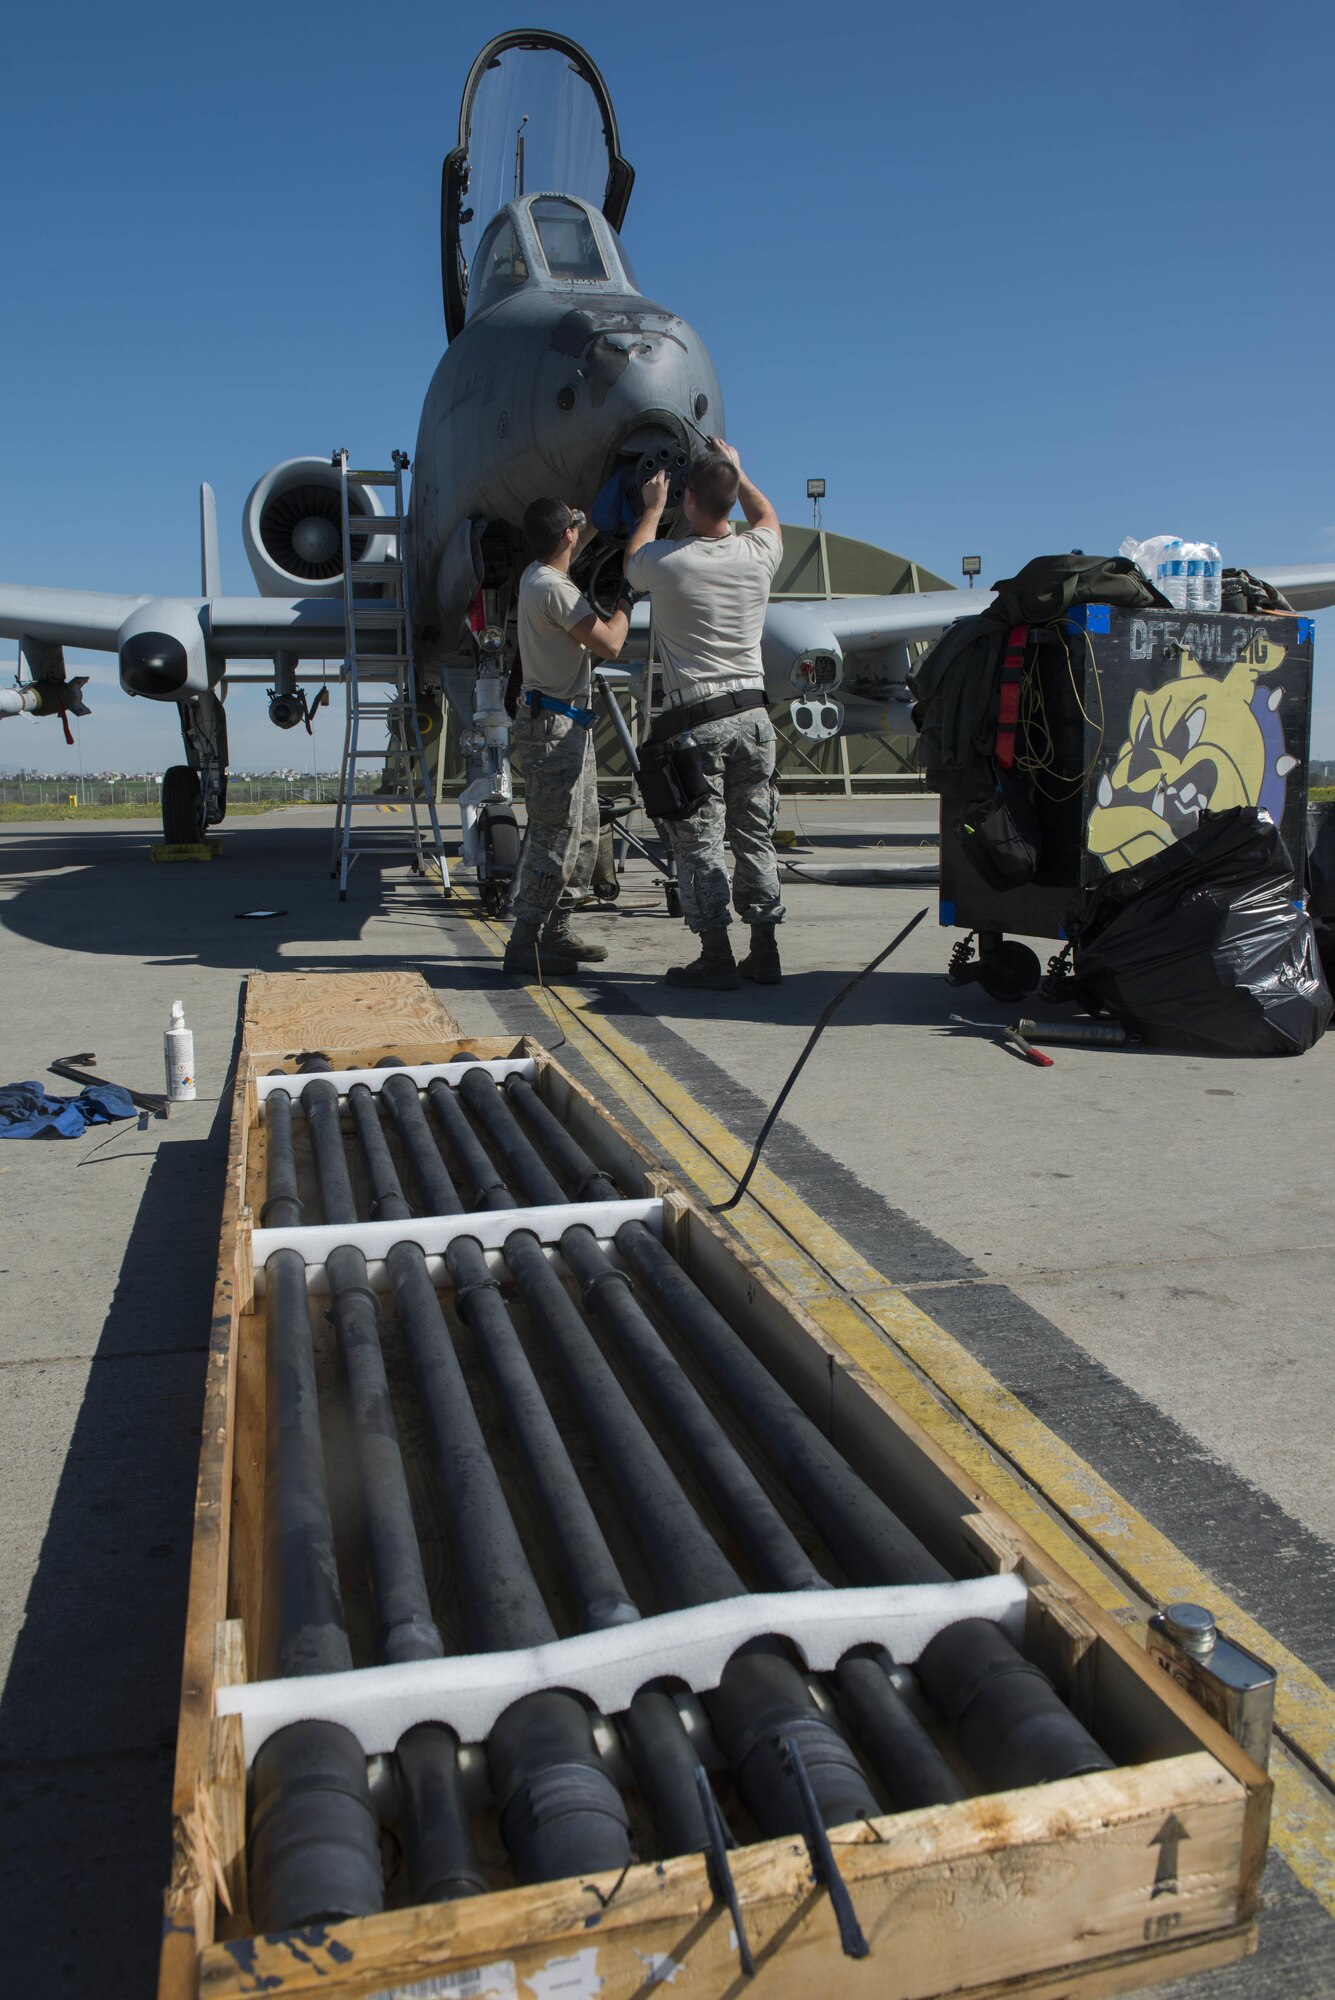 U.S. Air Force Staff Sgt. Stephans Doherty (left) and Senior Airman Nathaniel Awrey, both 447th Expeditionary Aircraft Maintenance Squadron aircraft armament systems journeyman, reassemble an A-10 Thunderbolt II GAU-8/A Avenger rotary cannon April 5, 2017, at Incirlik Air Base, Turkey. The seven barrels are inspected to ensure functionality and are replaced after 30 thousand rounds are fired through them. (U.S. Air Force photo by Airman 1st Class Devin M. Rumbaugh)